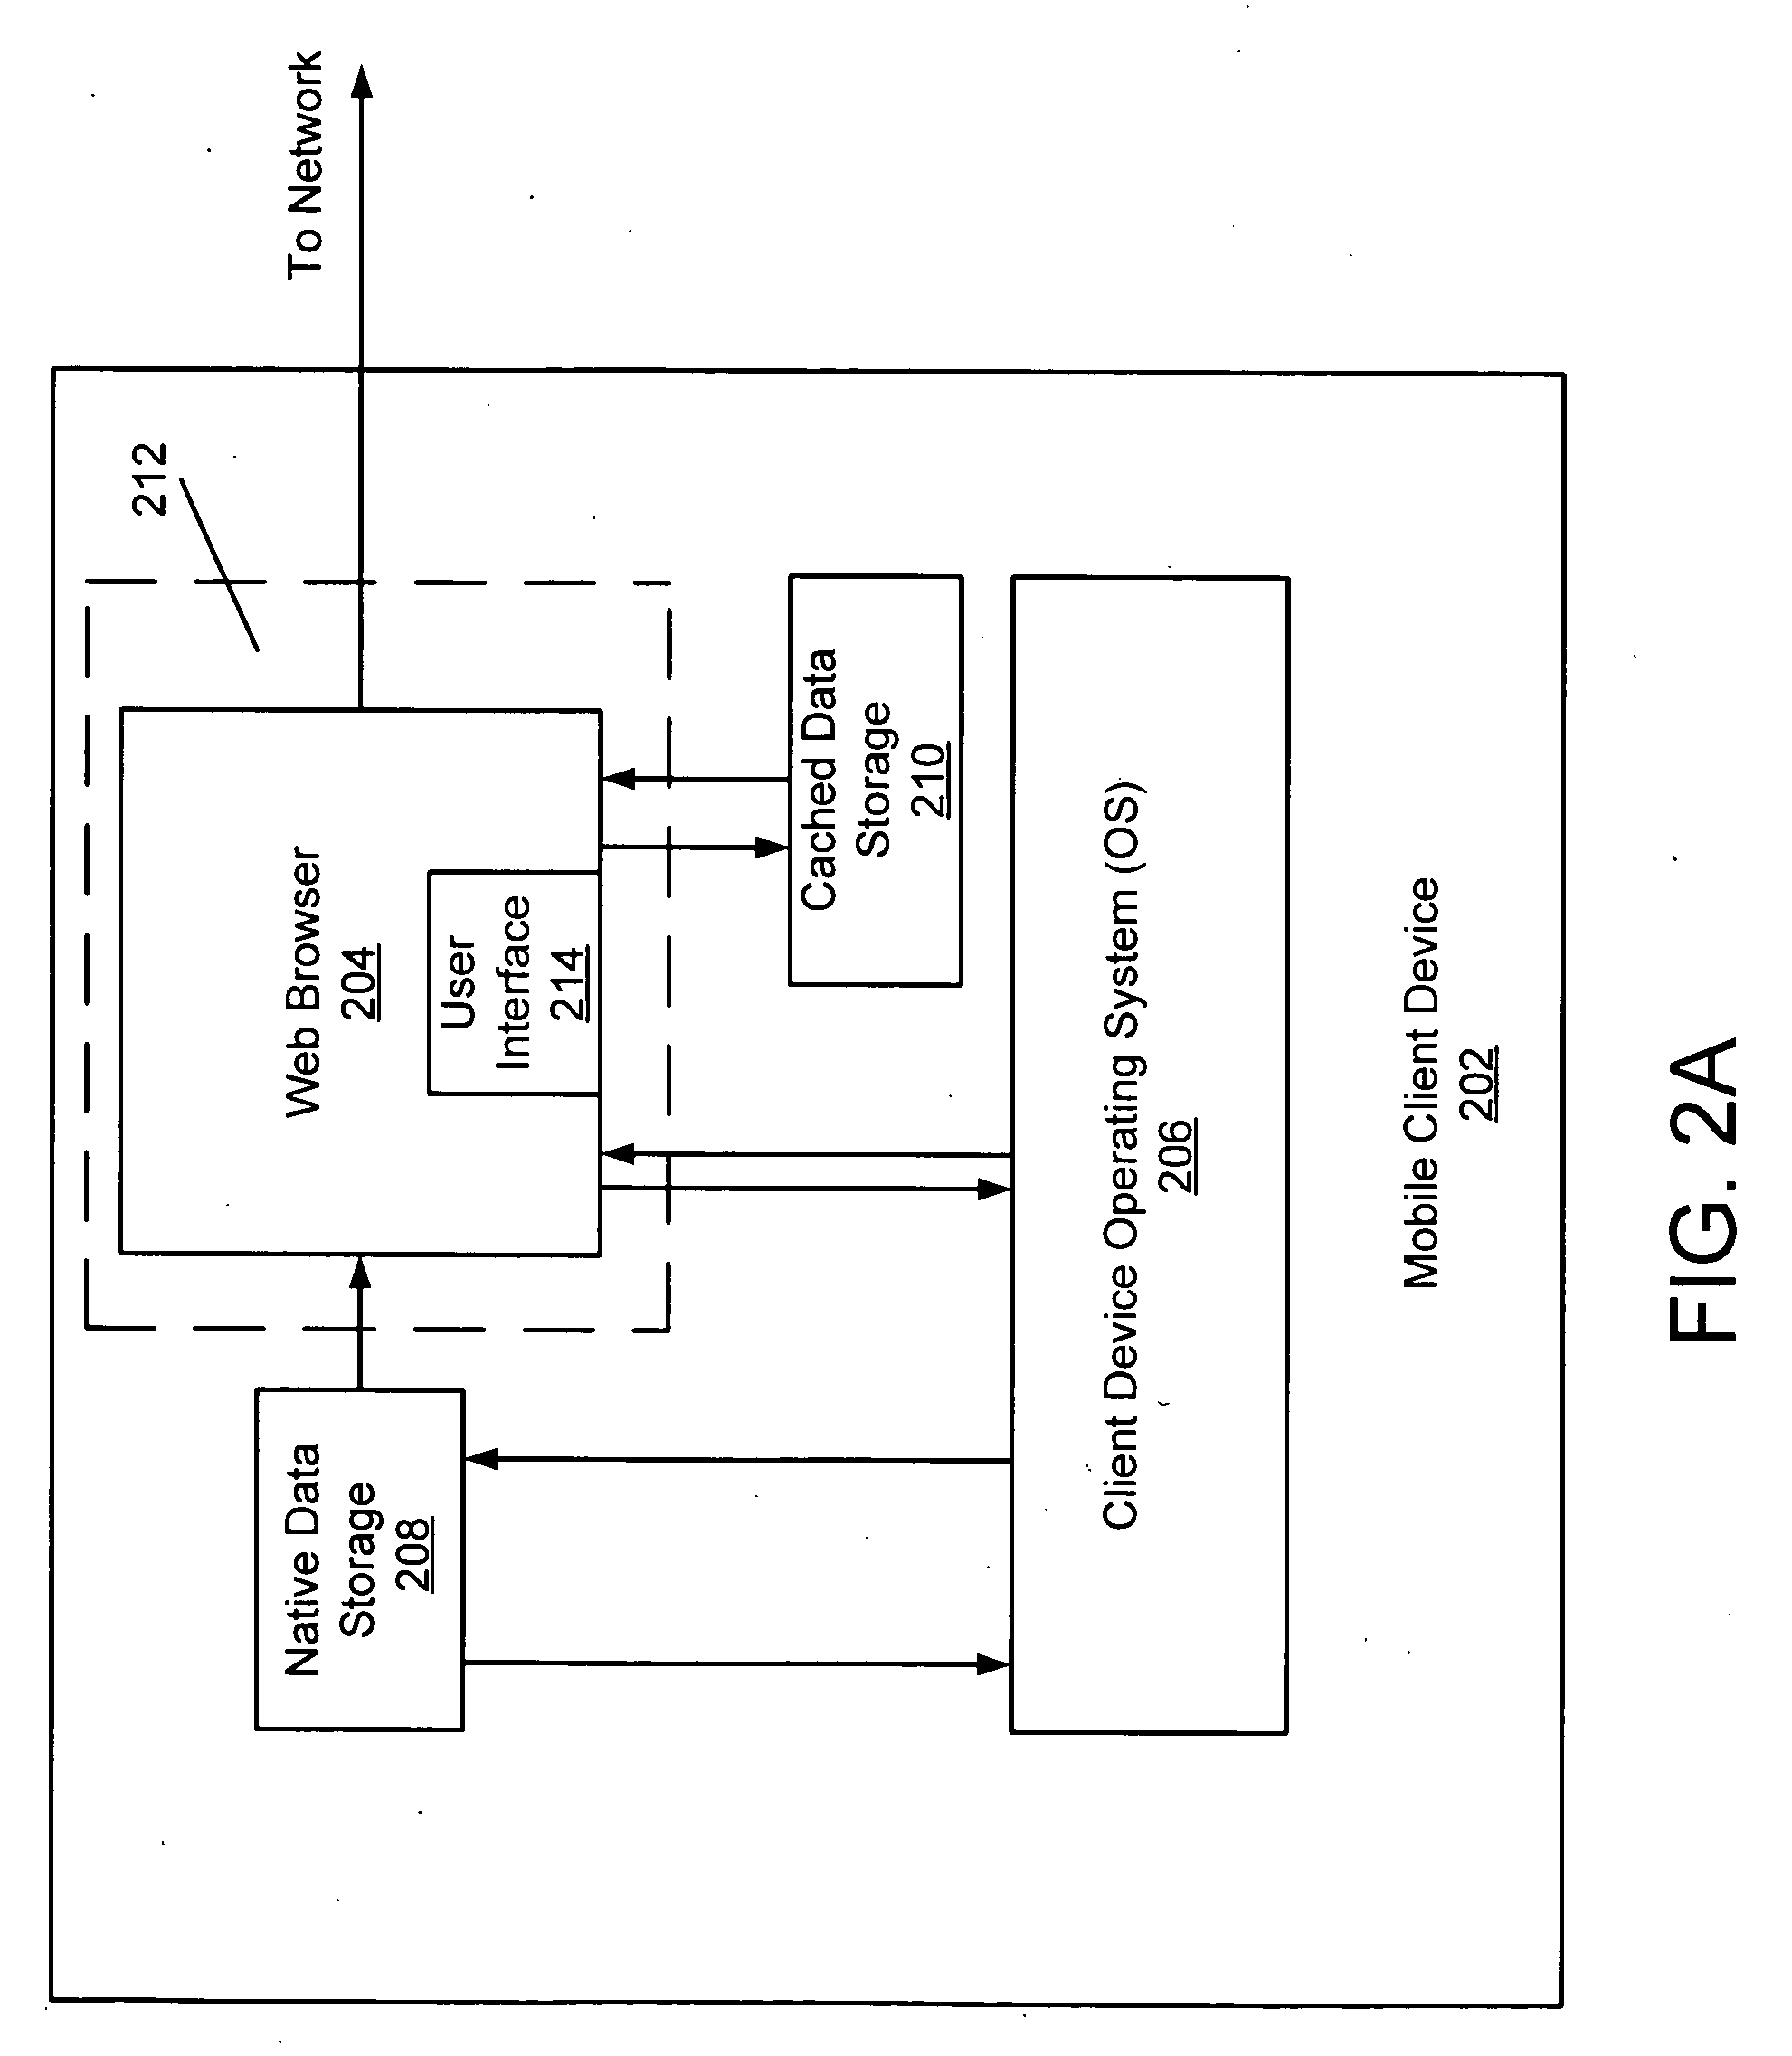 System and method for communication and mapping of business objects between mobile client devices and a plurality of backend systems